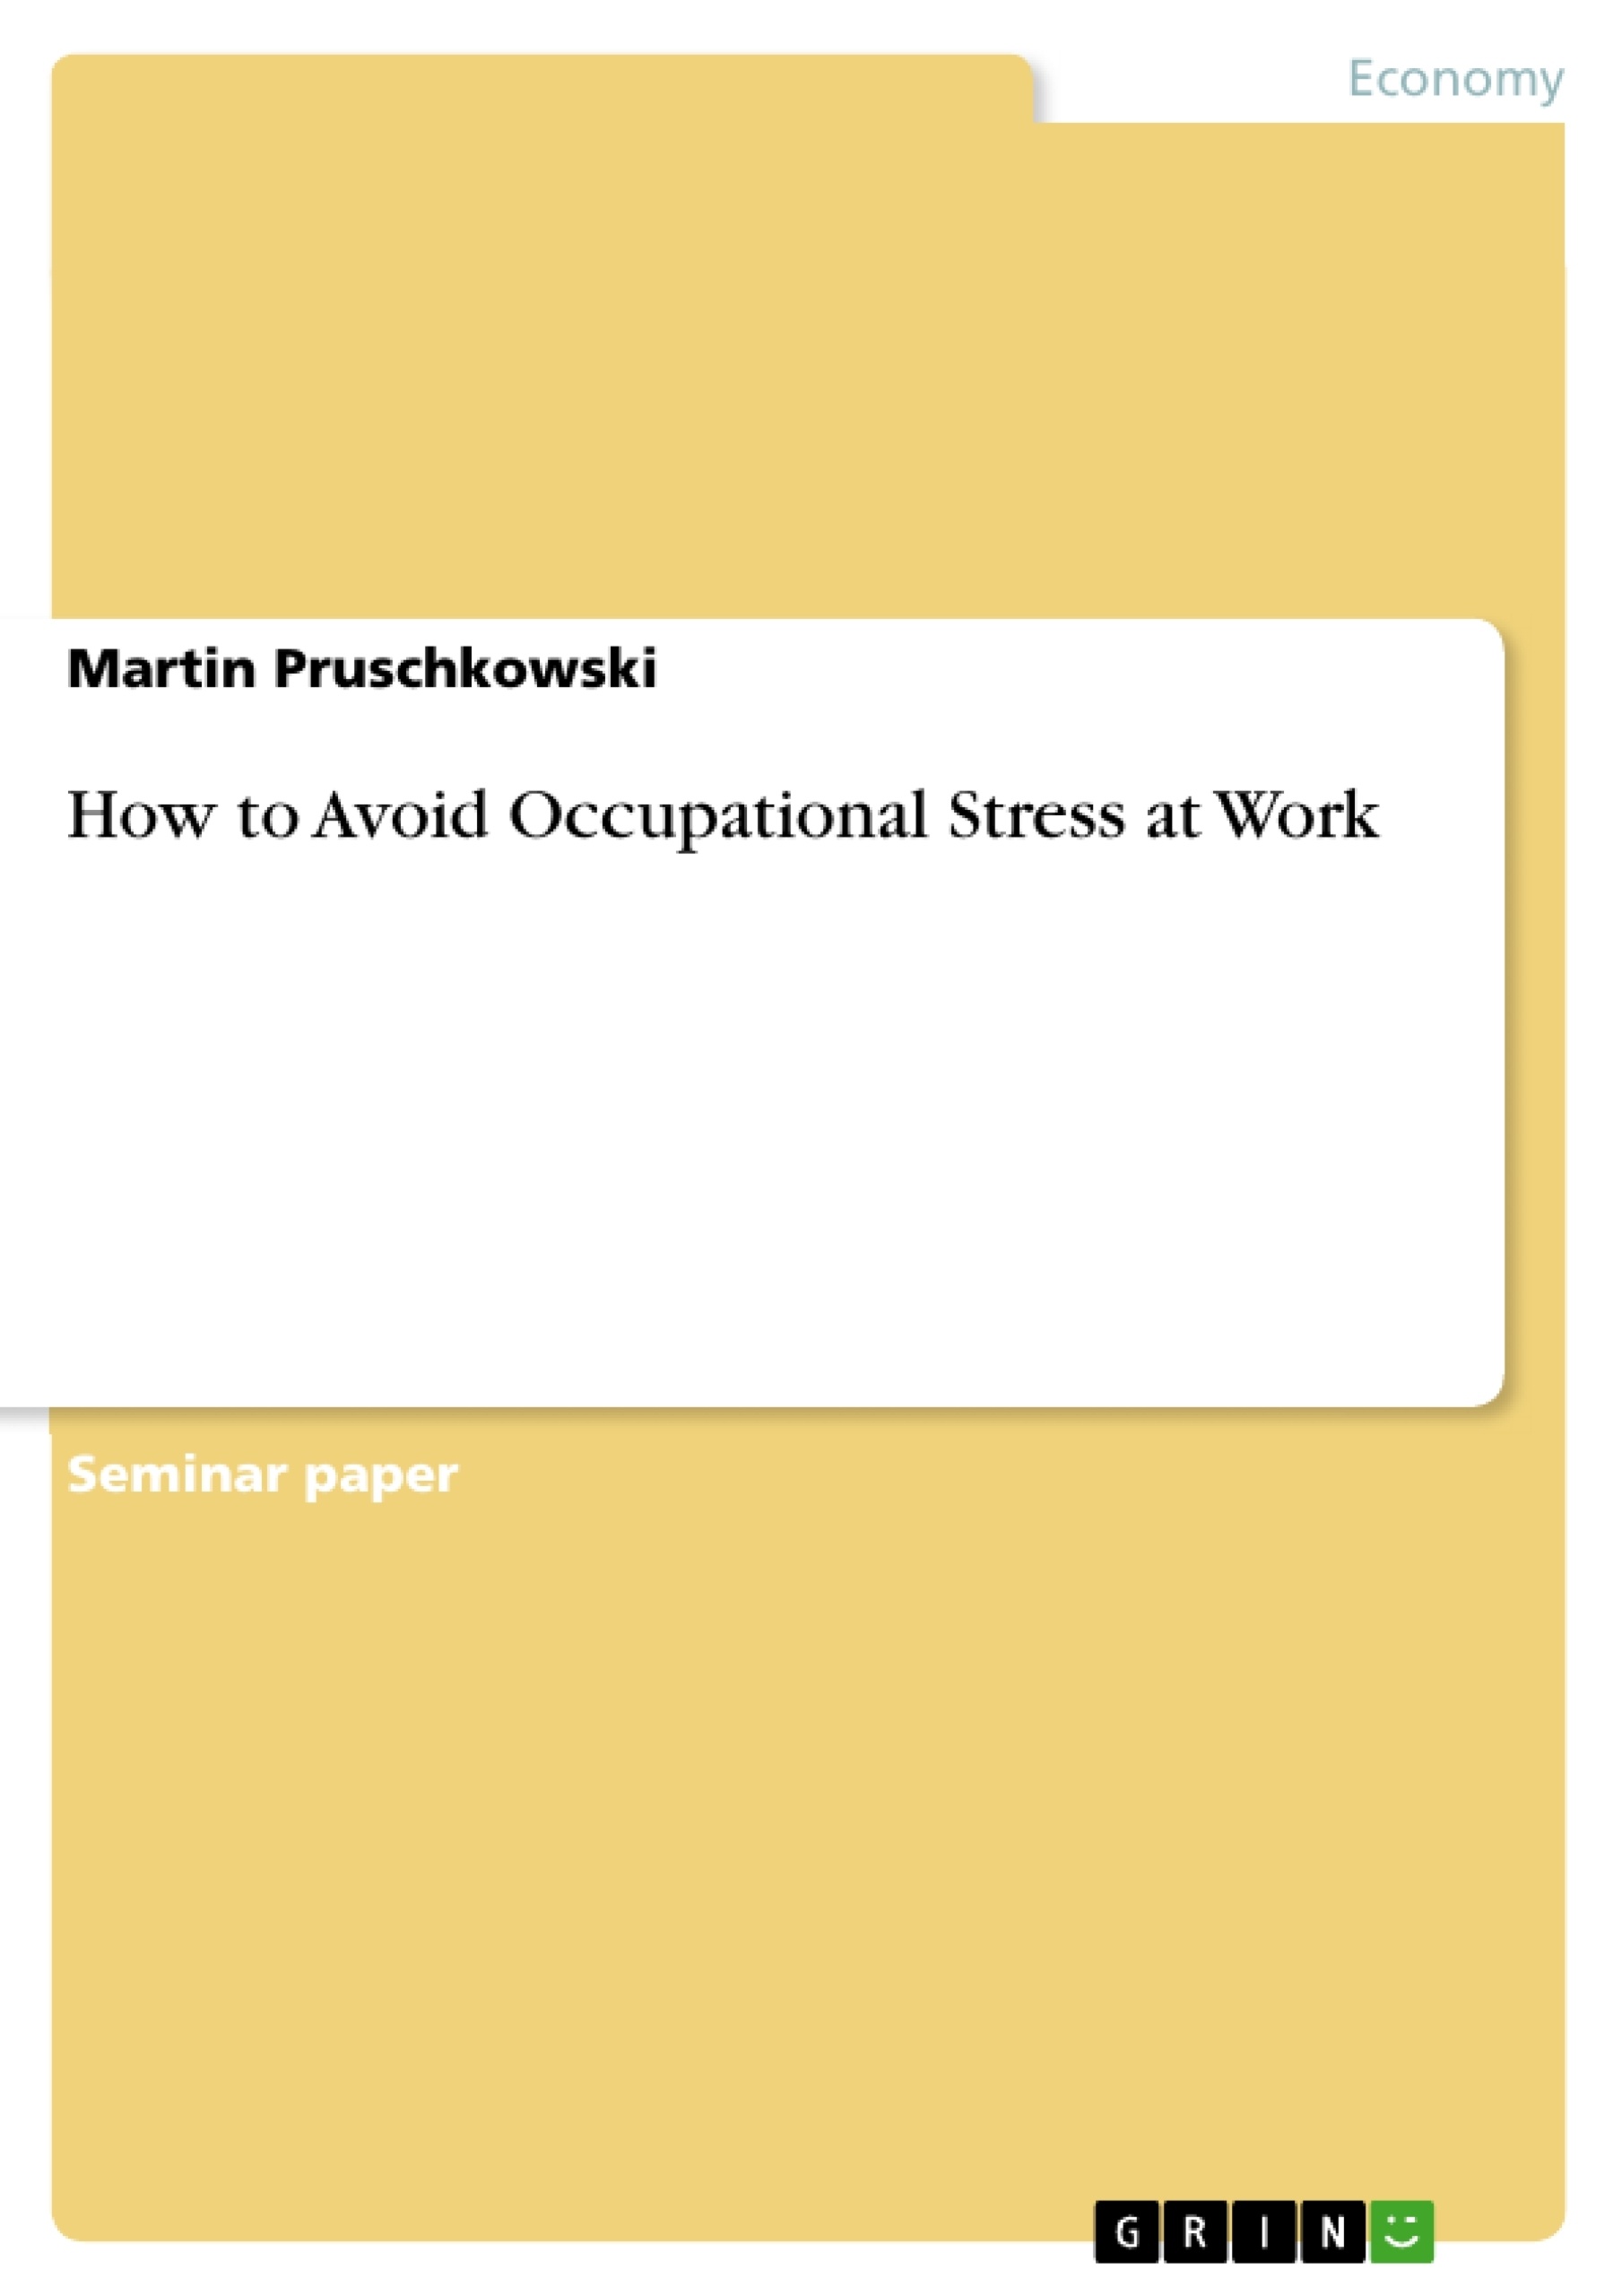 Title: How to Avoid Occupational Stress at Work